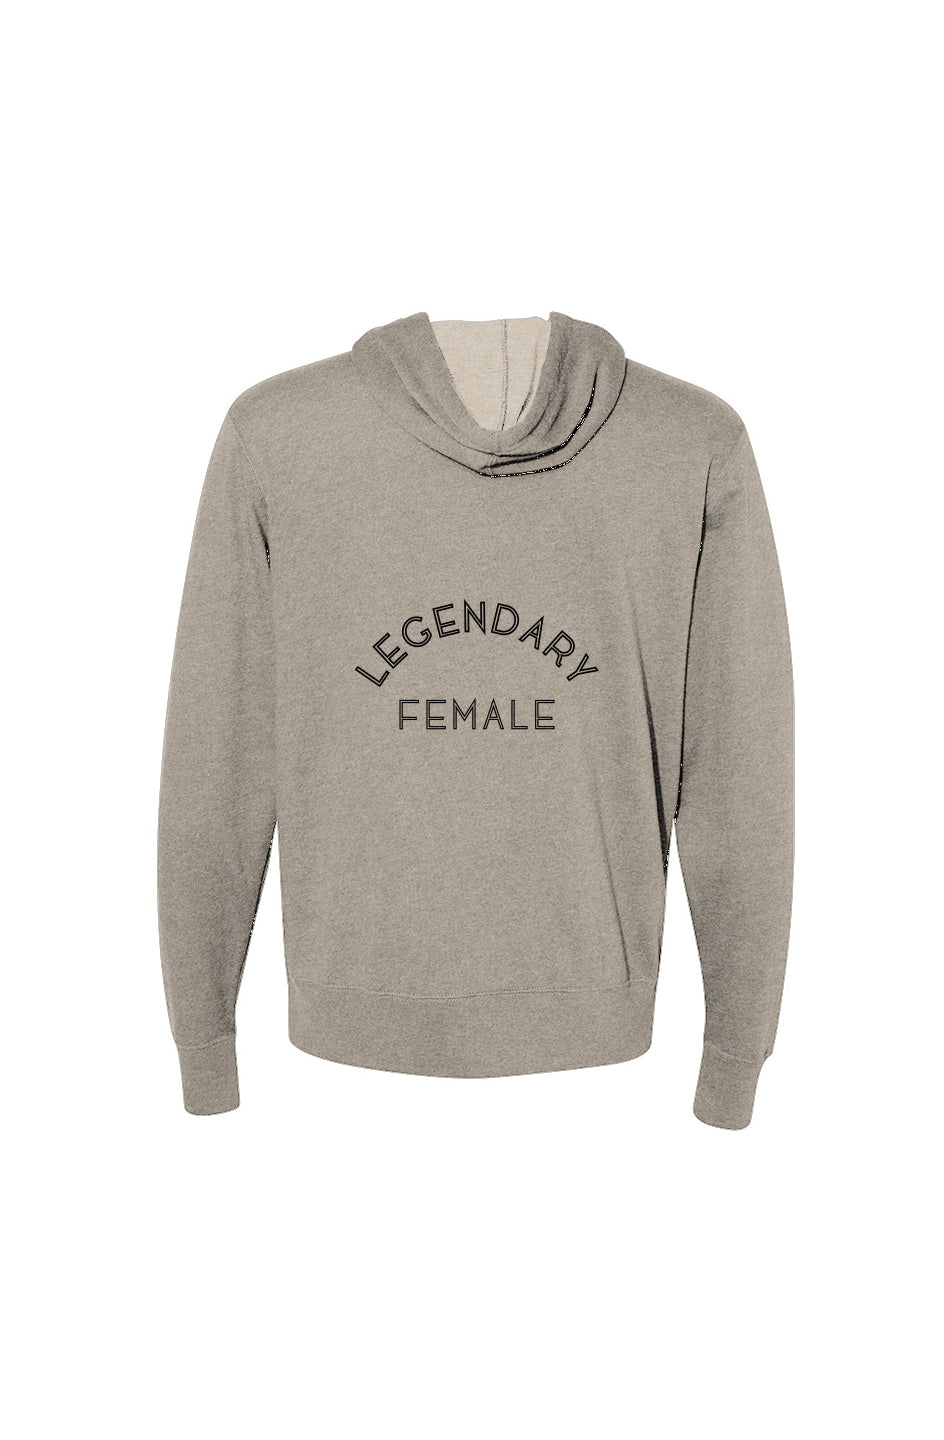 Legendary Female French Terry Zip-Up Hoodie